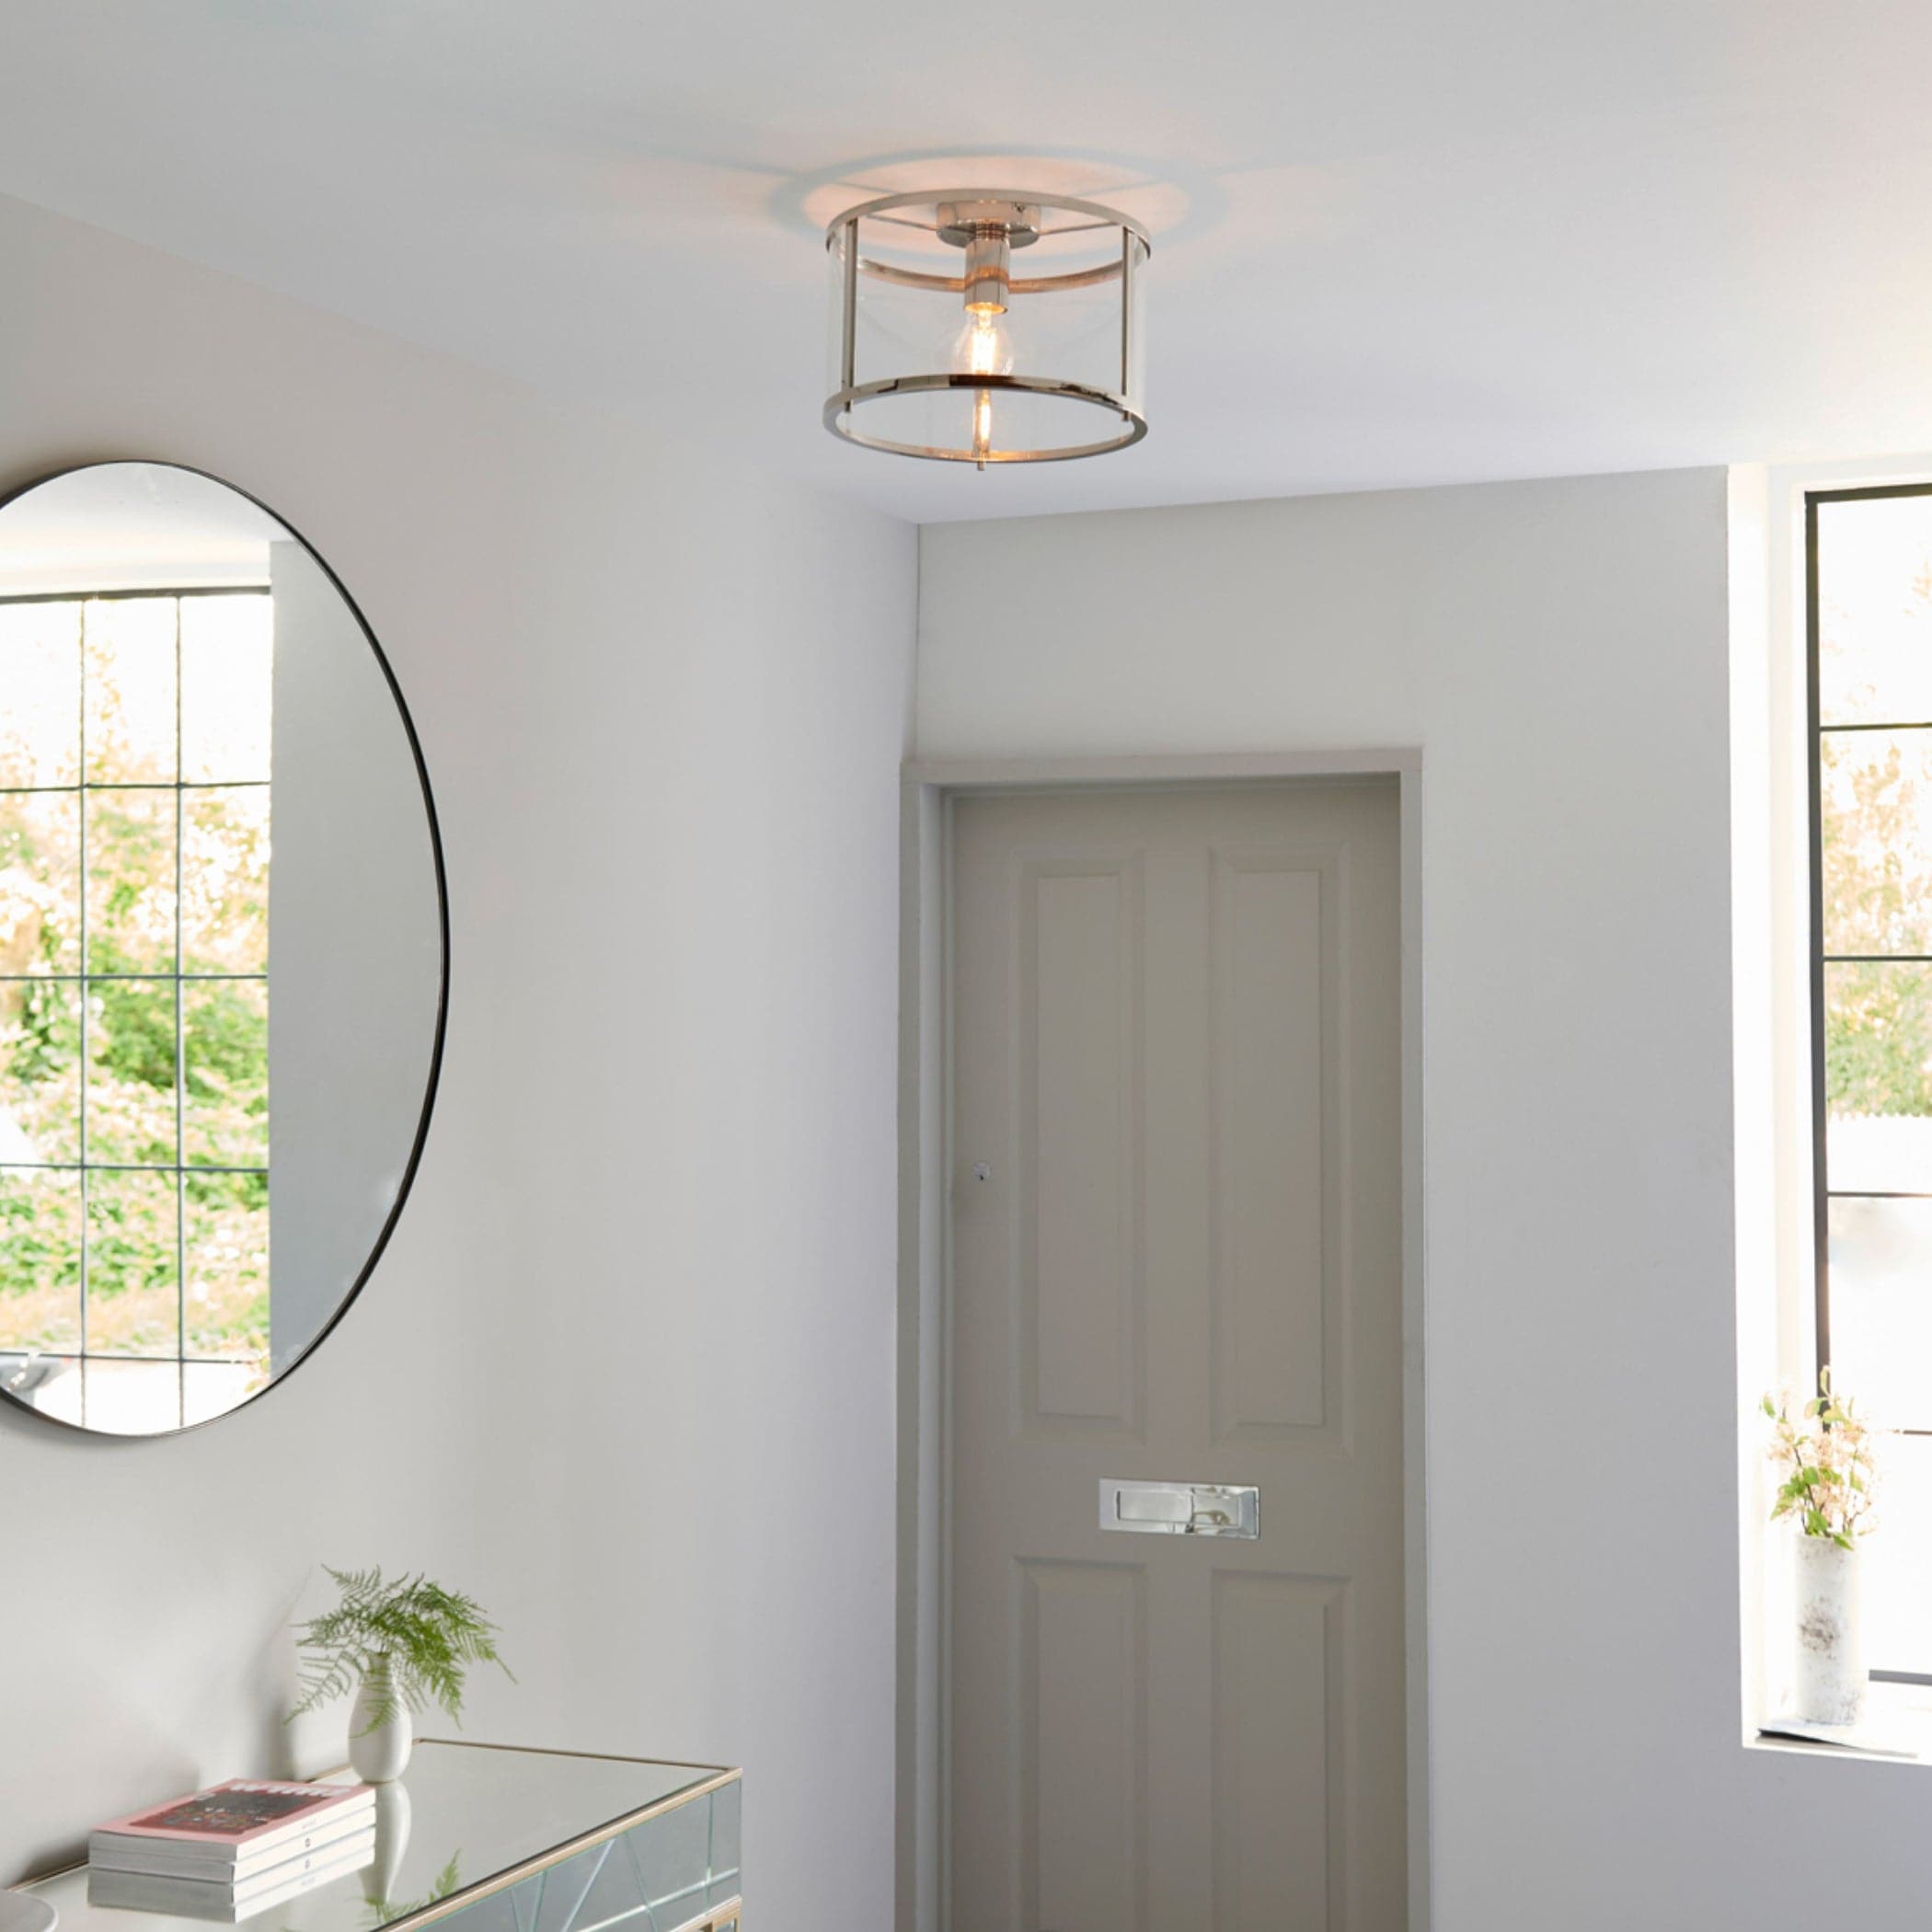 Round Nickel and Glass Ceiling Light 3